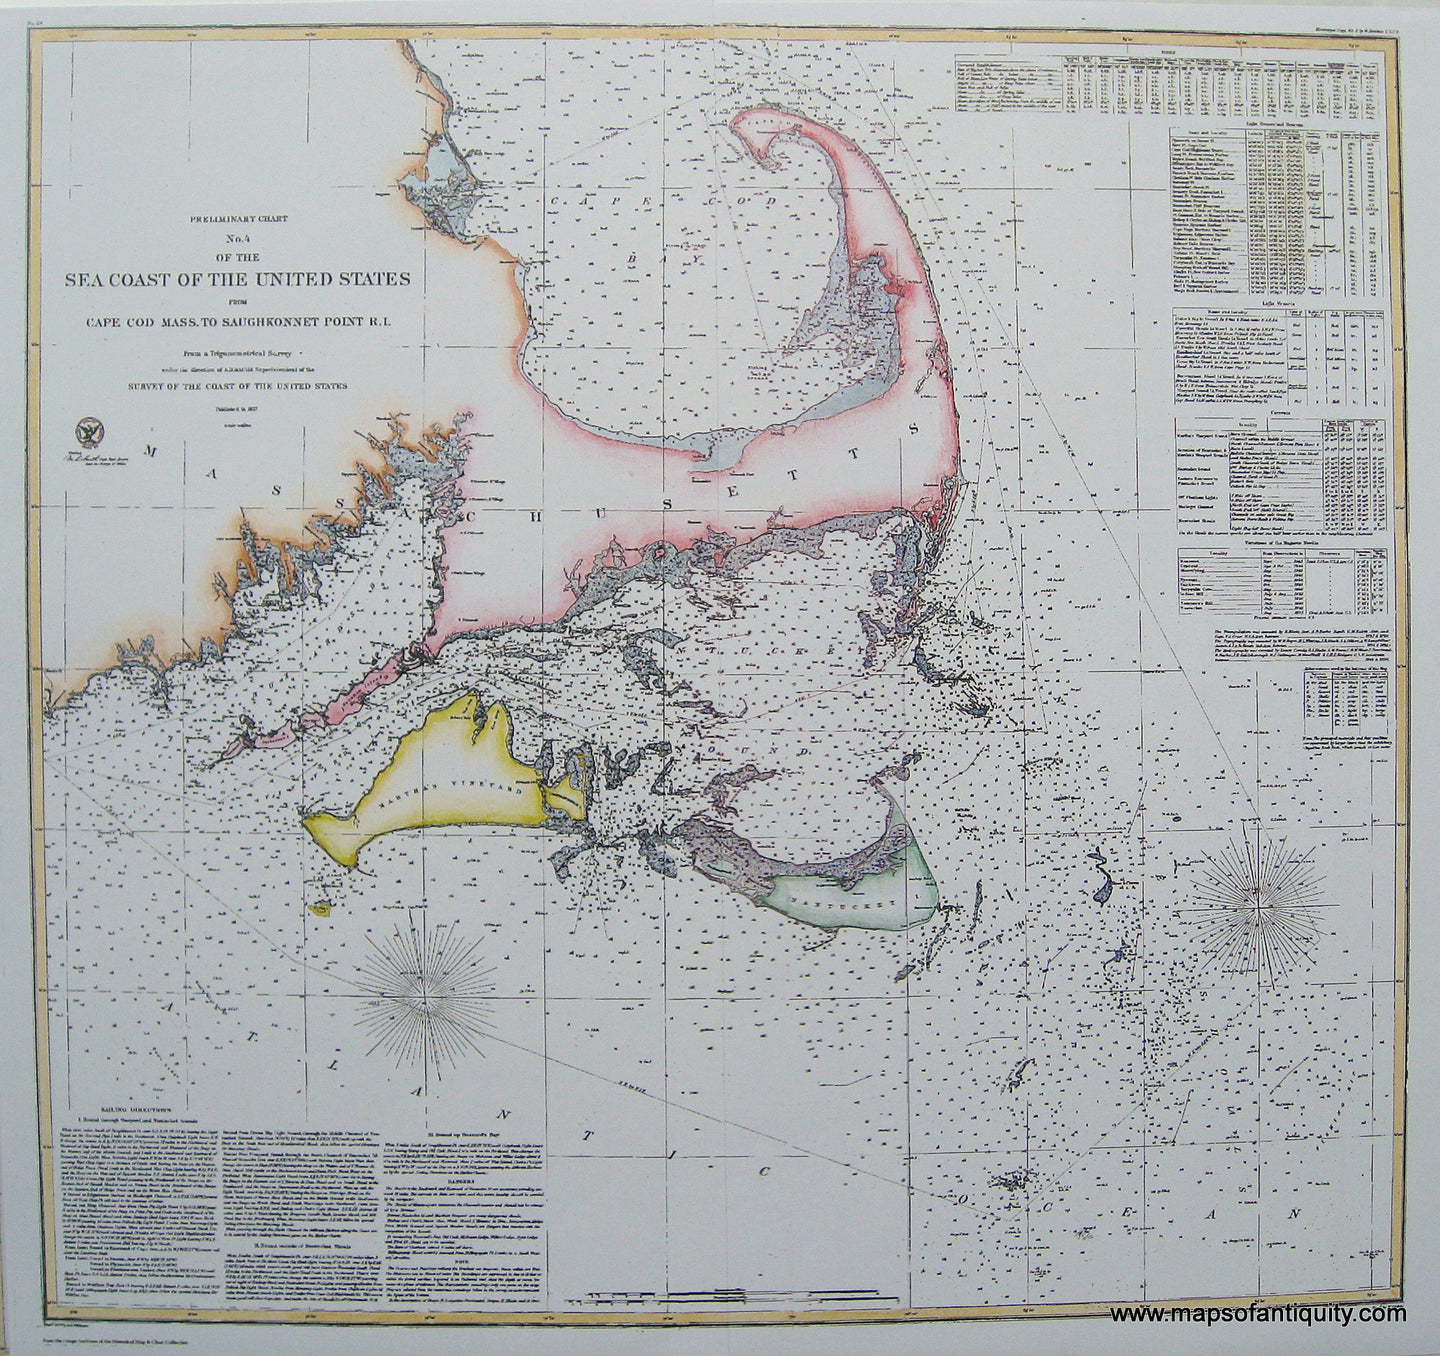 Printed-Color-Reproduction-Cape-Cod-Mass-to-Saughkonnett-R.I.-1857---Reproduction-Reproductions-Cape-Cod-and-Islands-Reproduction-U.S.-Coast-Survey-Maps-Of-Antiquity